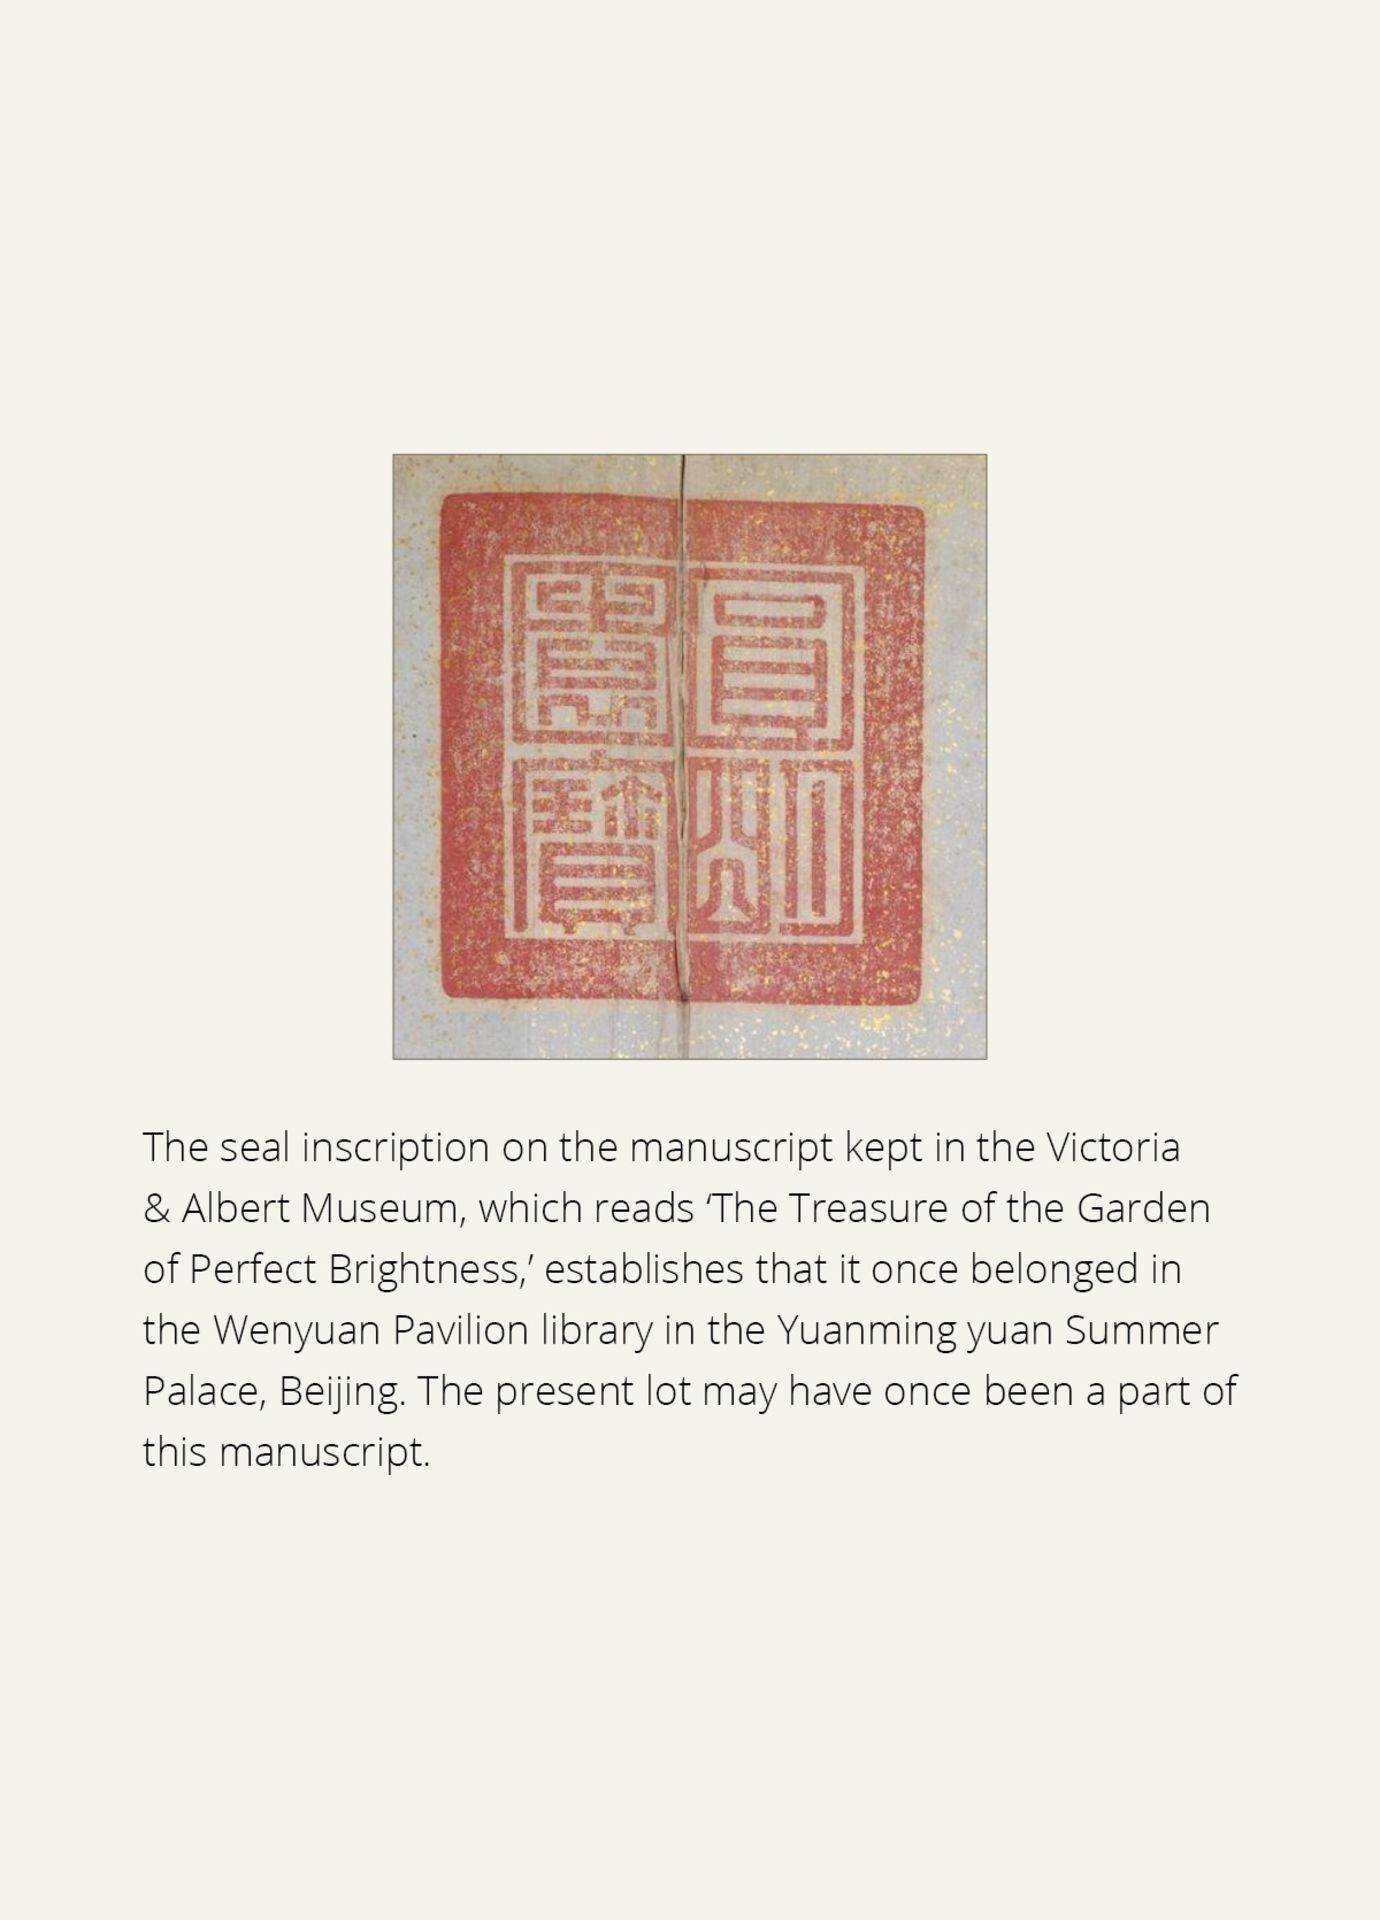 A RARE AND IMPORTANT ALBUM LEAF FROM THE HUANGCHAO LIQI TUSHI WITH AN IMPERIALLY INSCRIBED SILK PAIN - Image 5 of 21